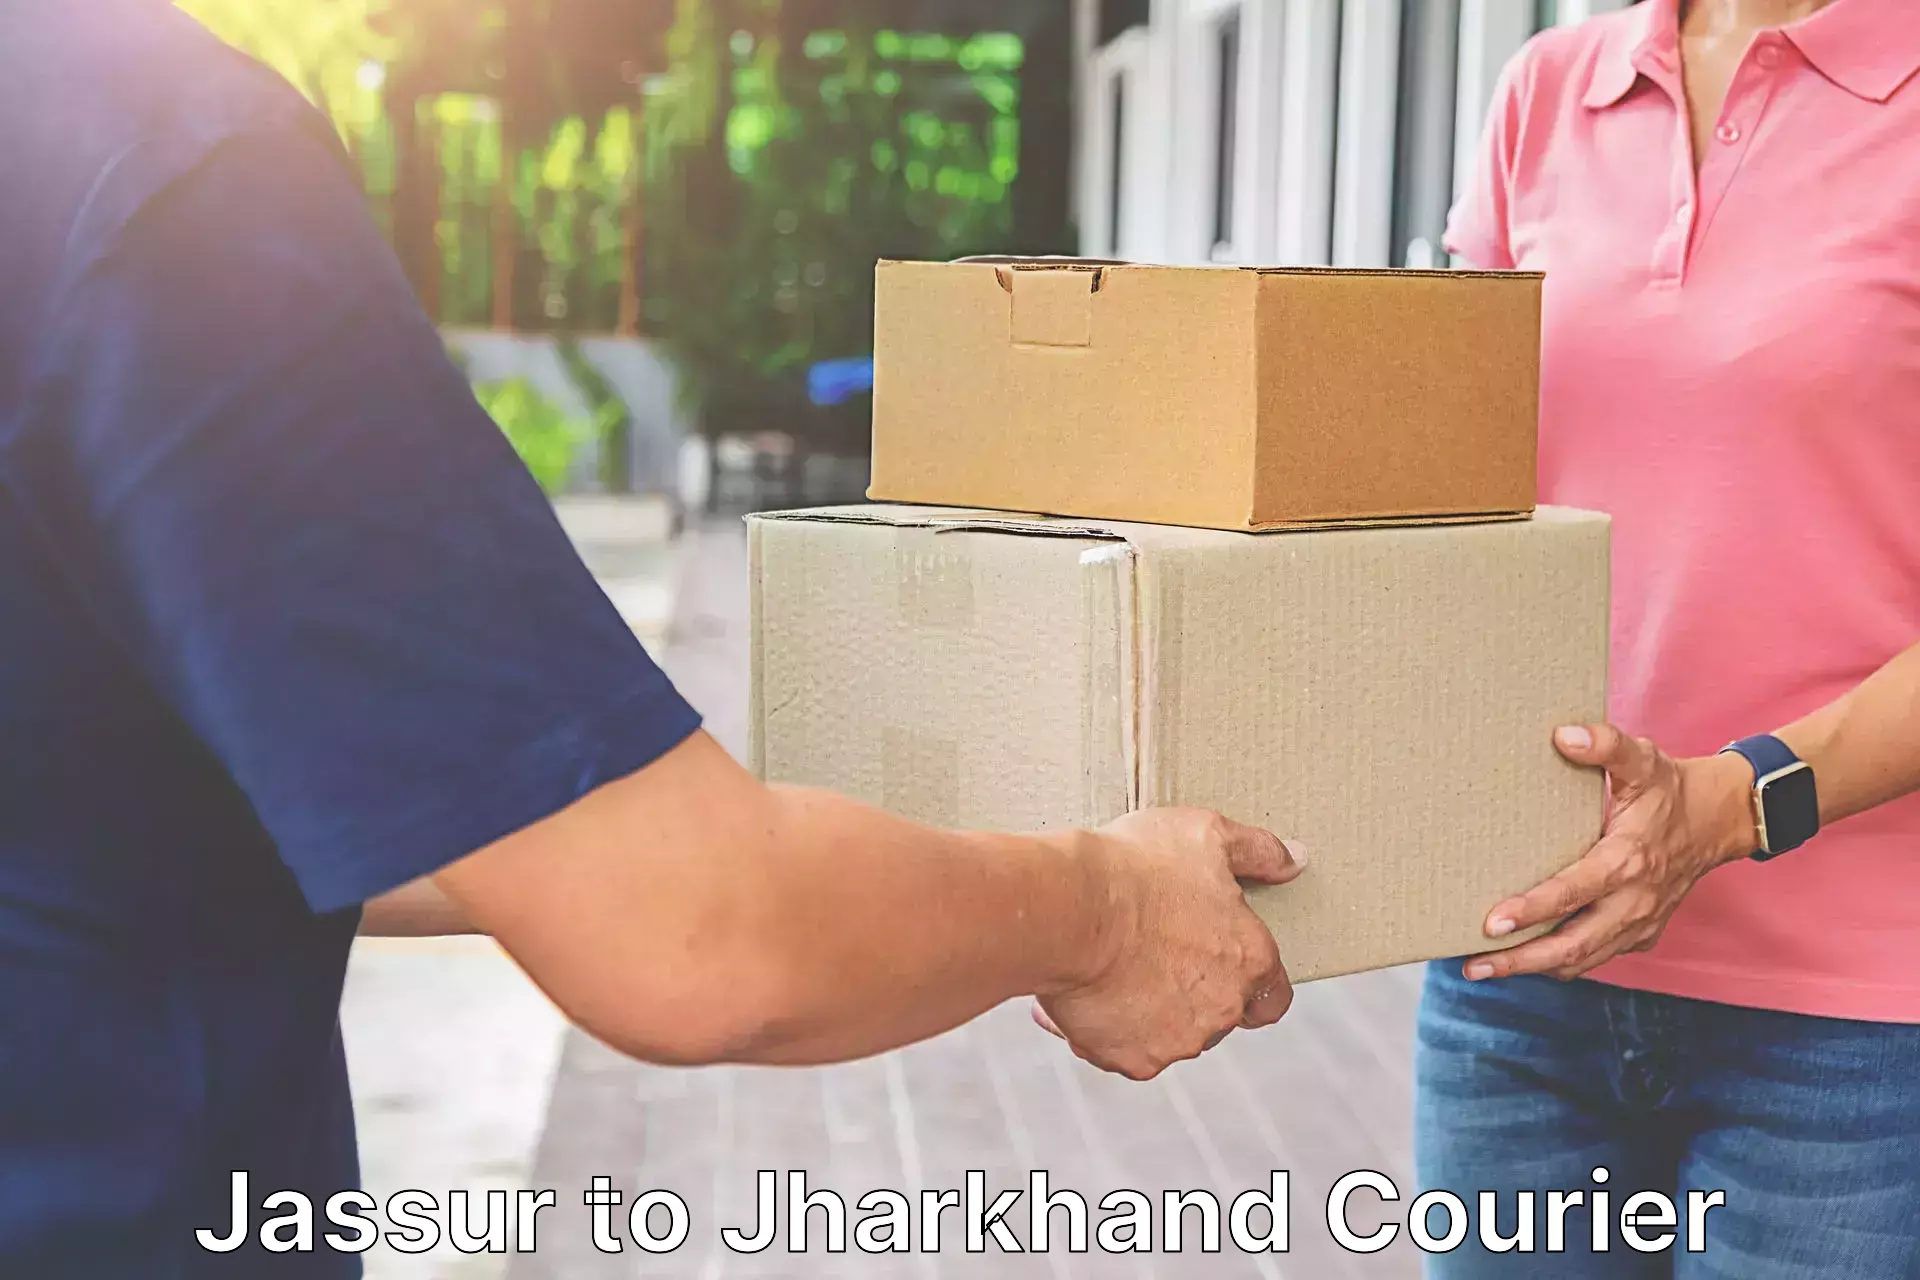 Sustainable delivery practices Jassur to Jharkhand